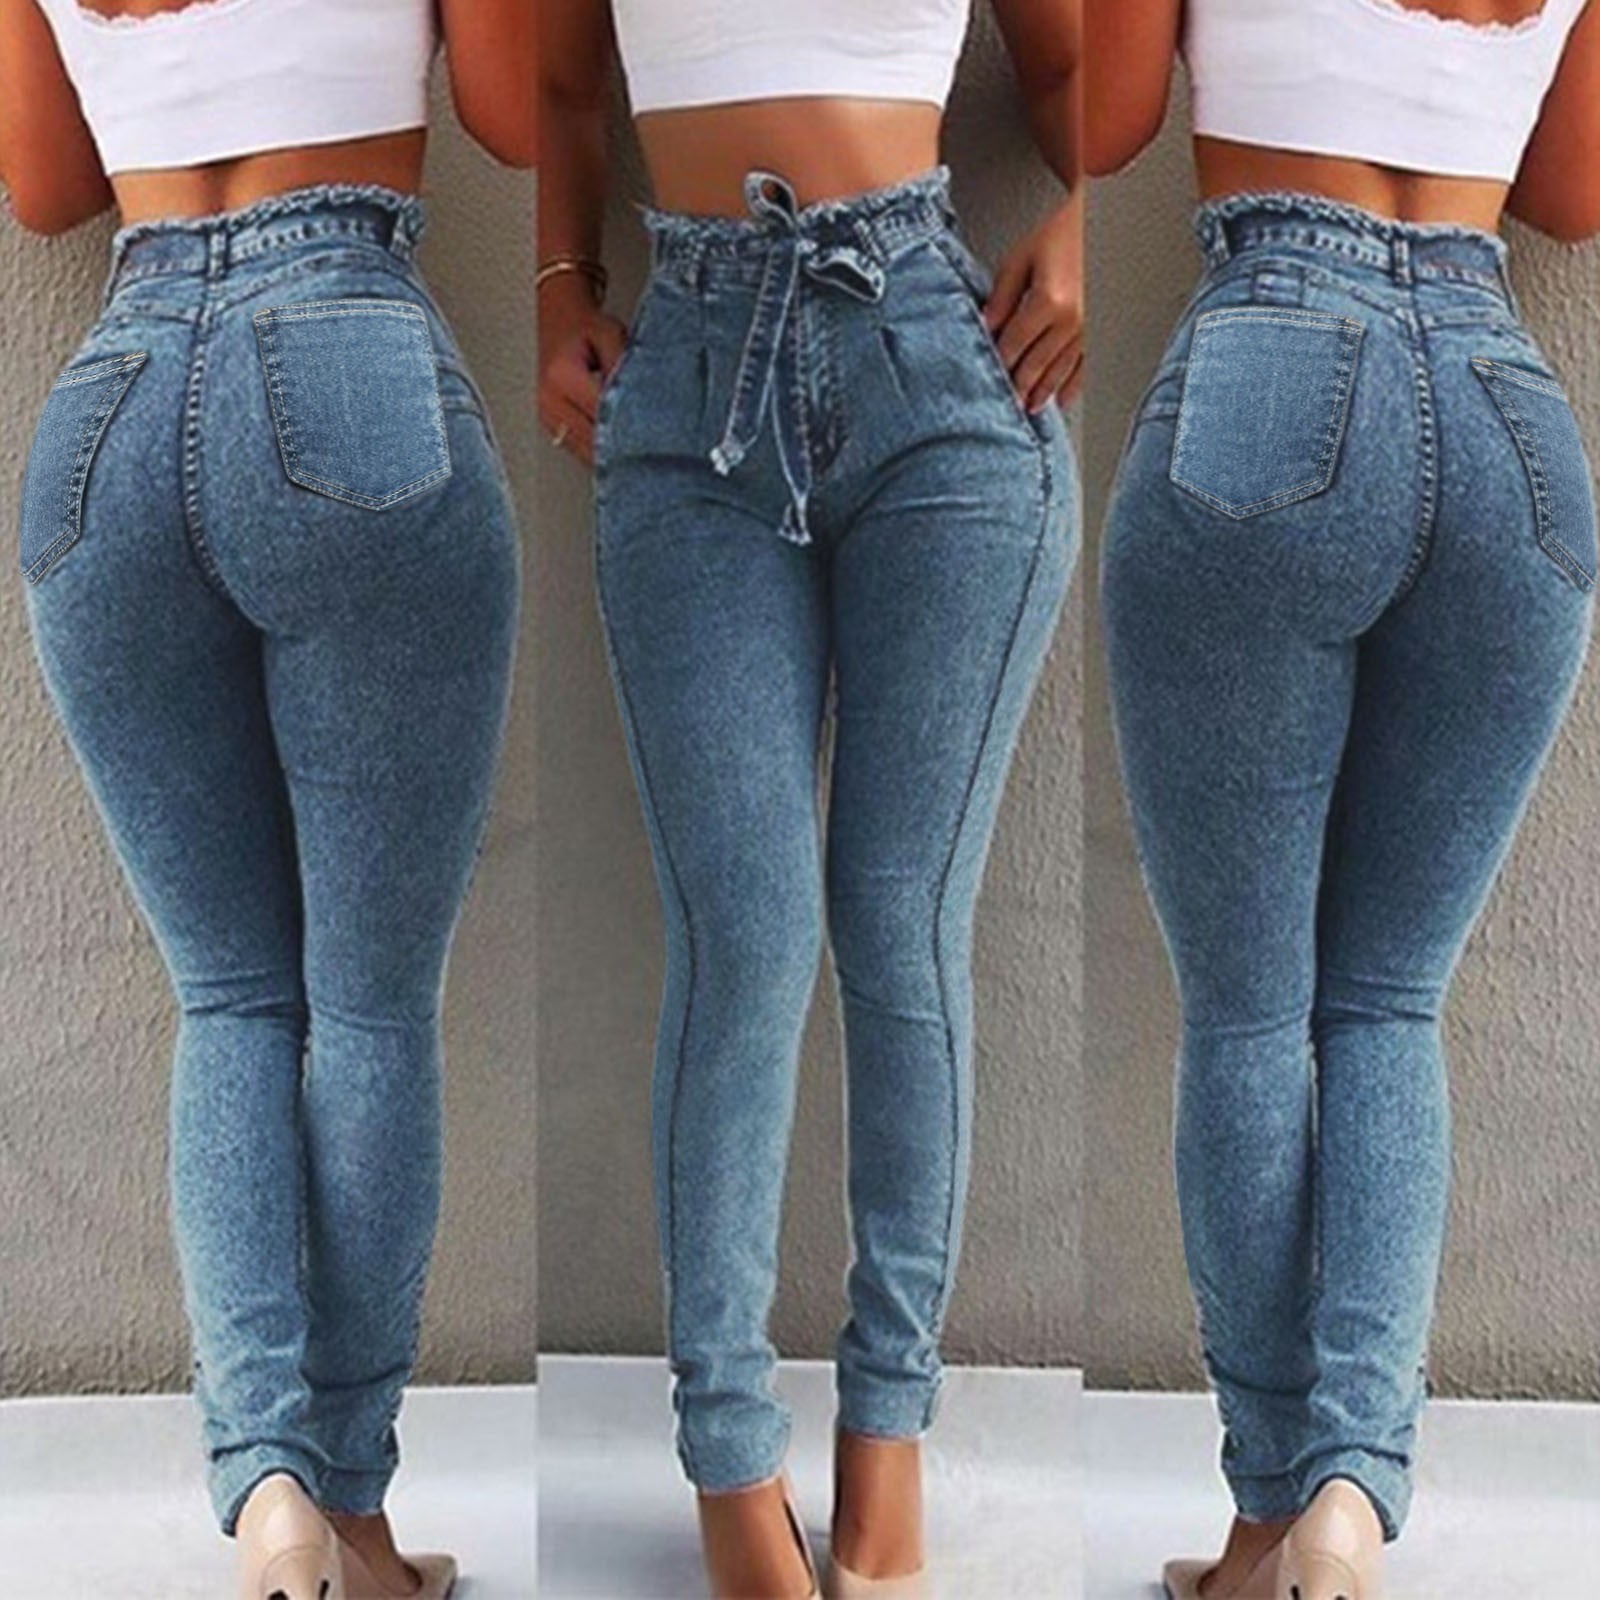 Jeans for Women Women's Casual High-Waist Lace-Up Denim Trousers Slim  Stretch Jeans Trousers Womens Jeans Grey L